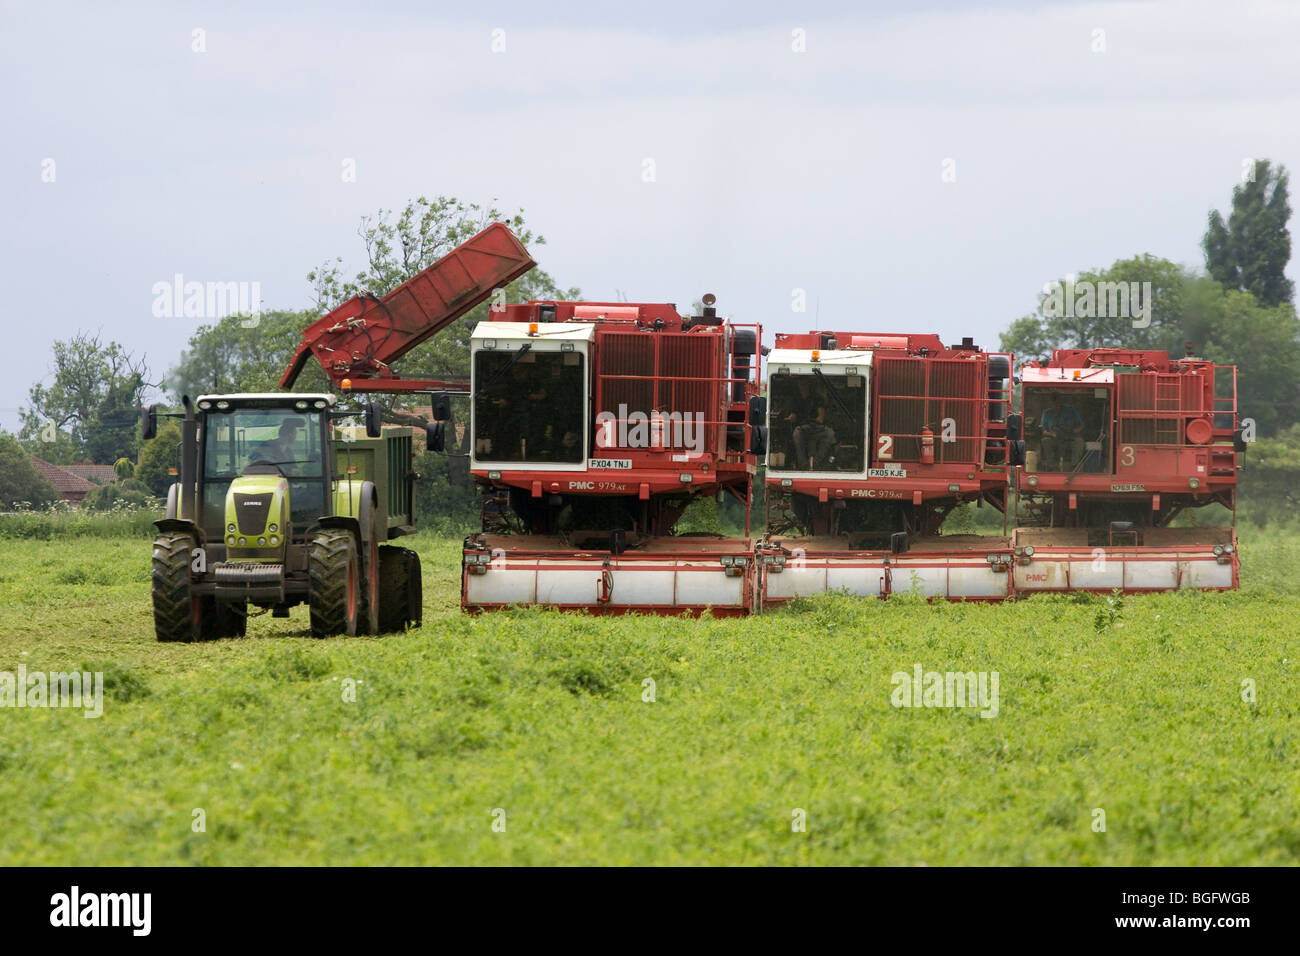 Erbse Vining In Lincolnshire Stockfoto